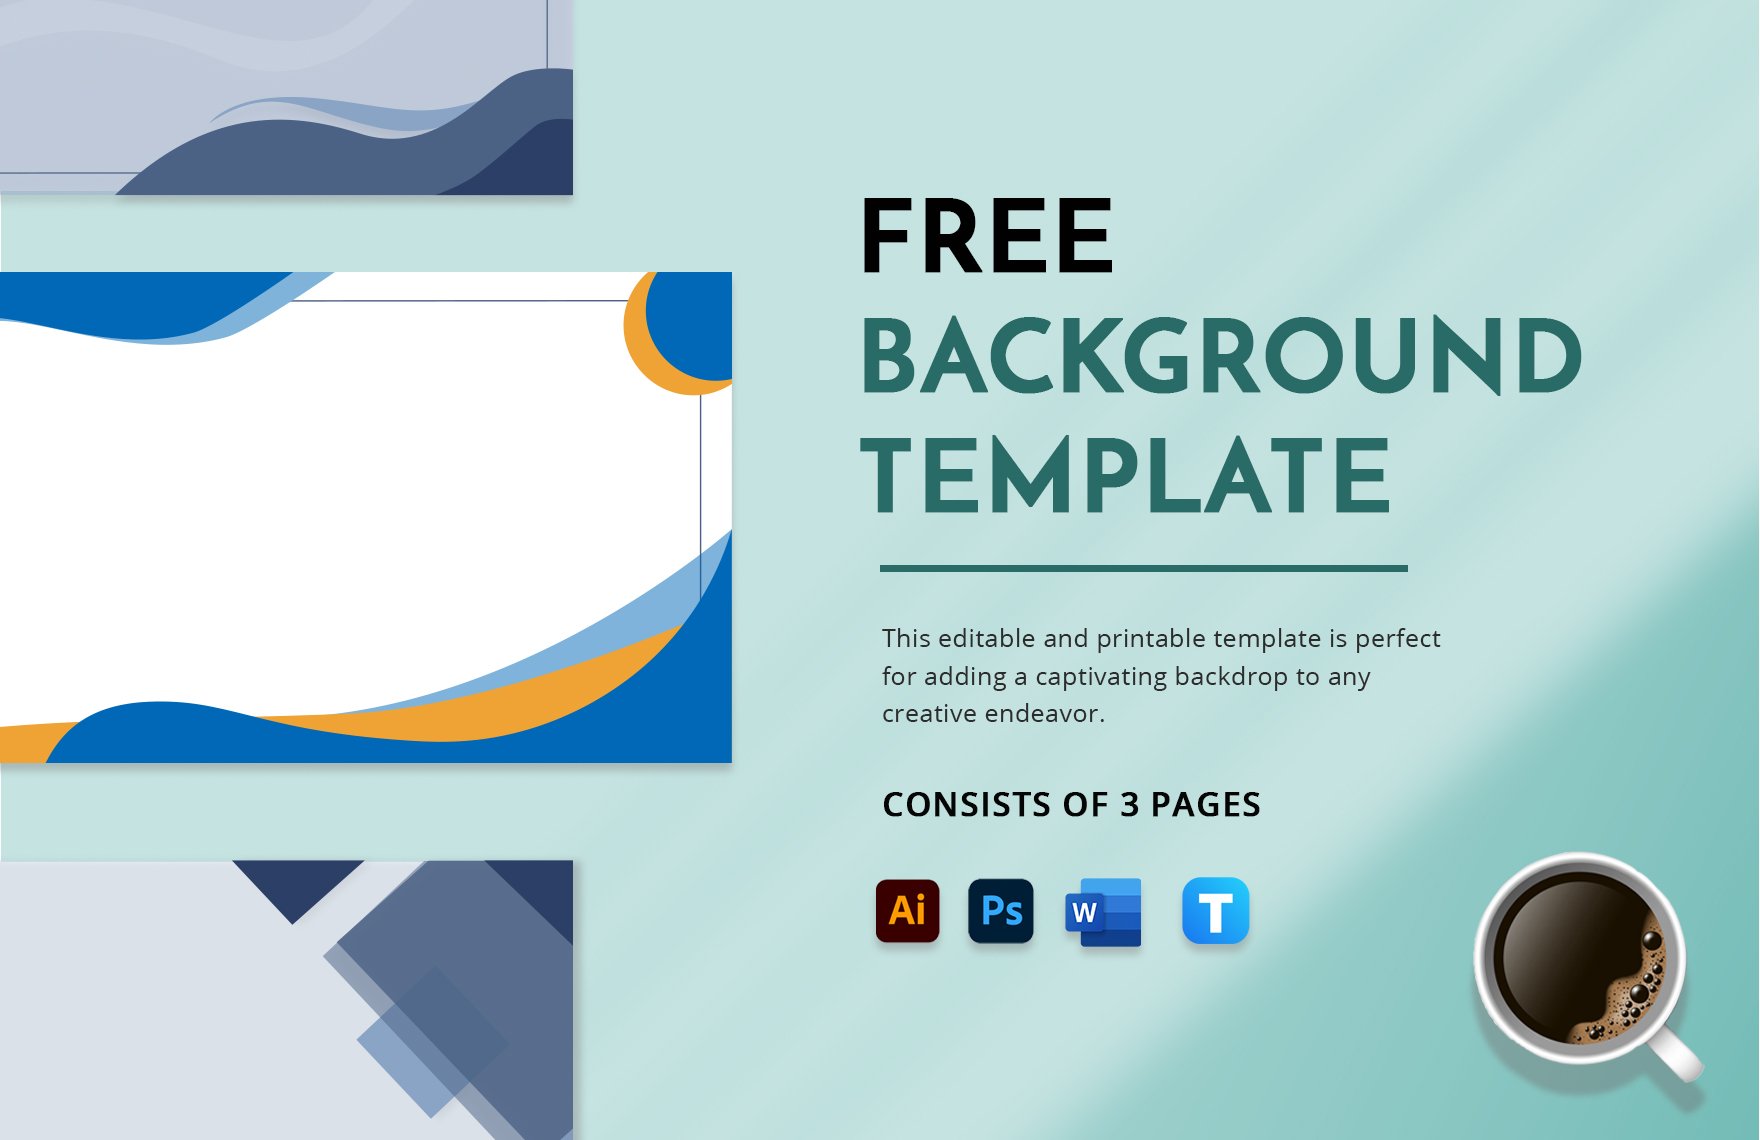 Free Background Template in Word, Illustrator, PSD